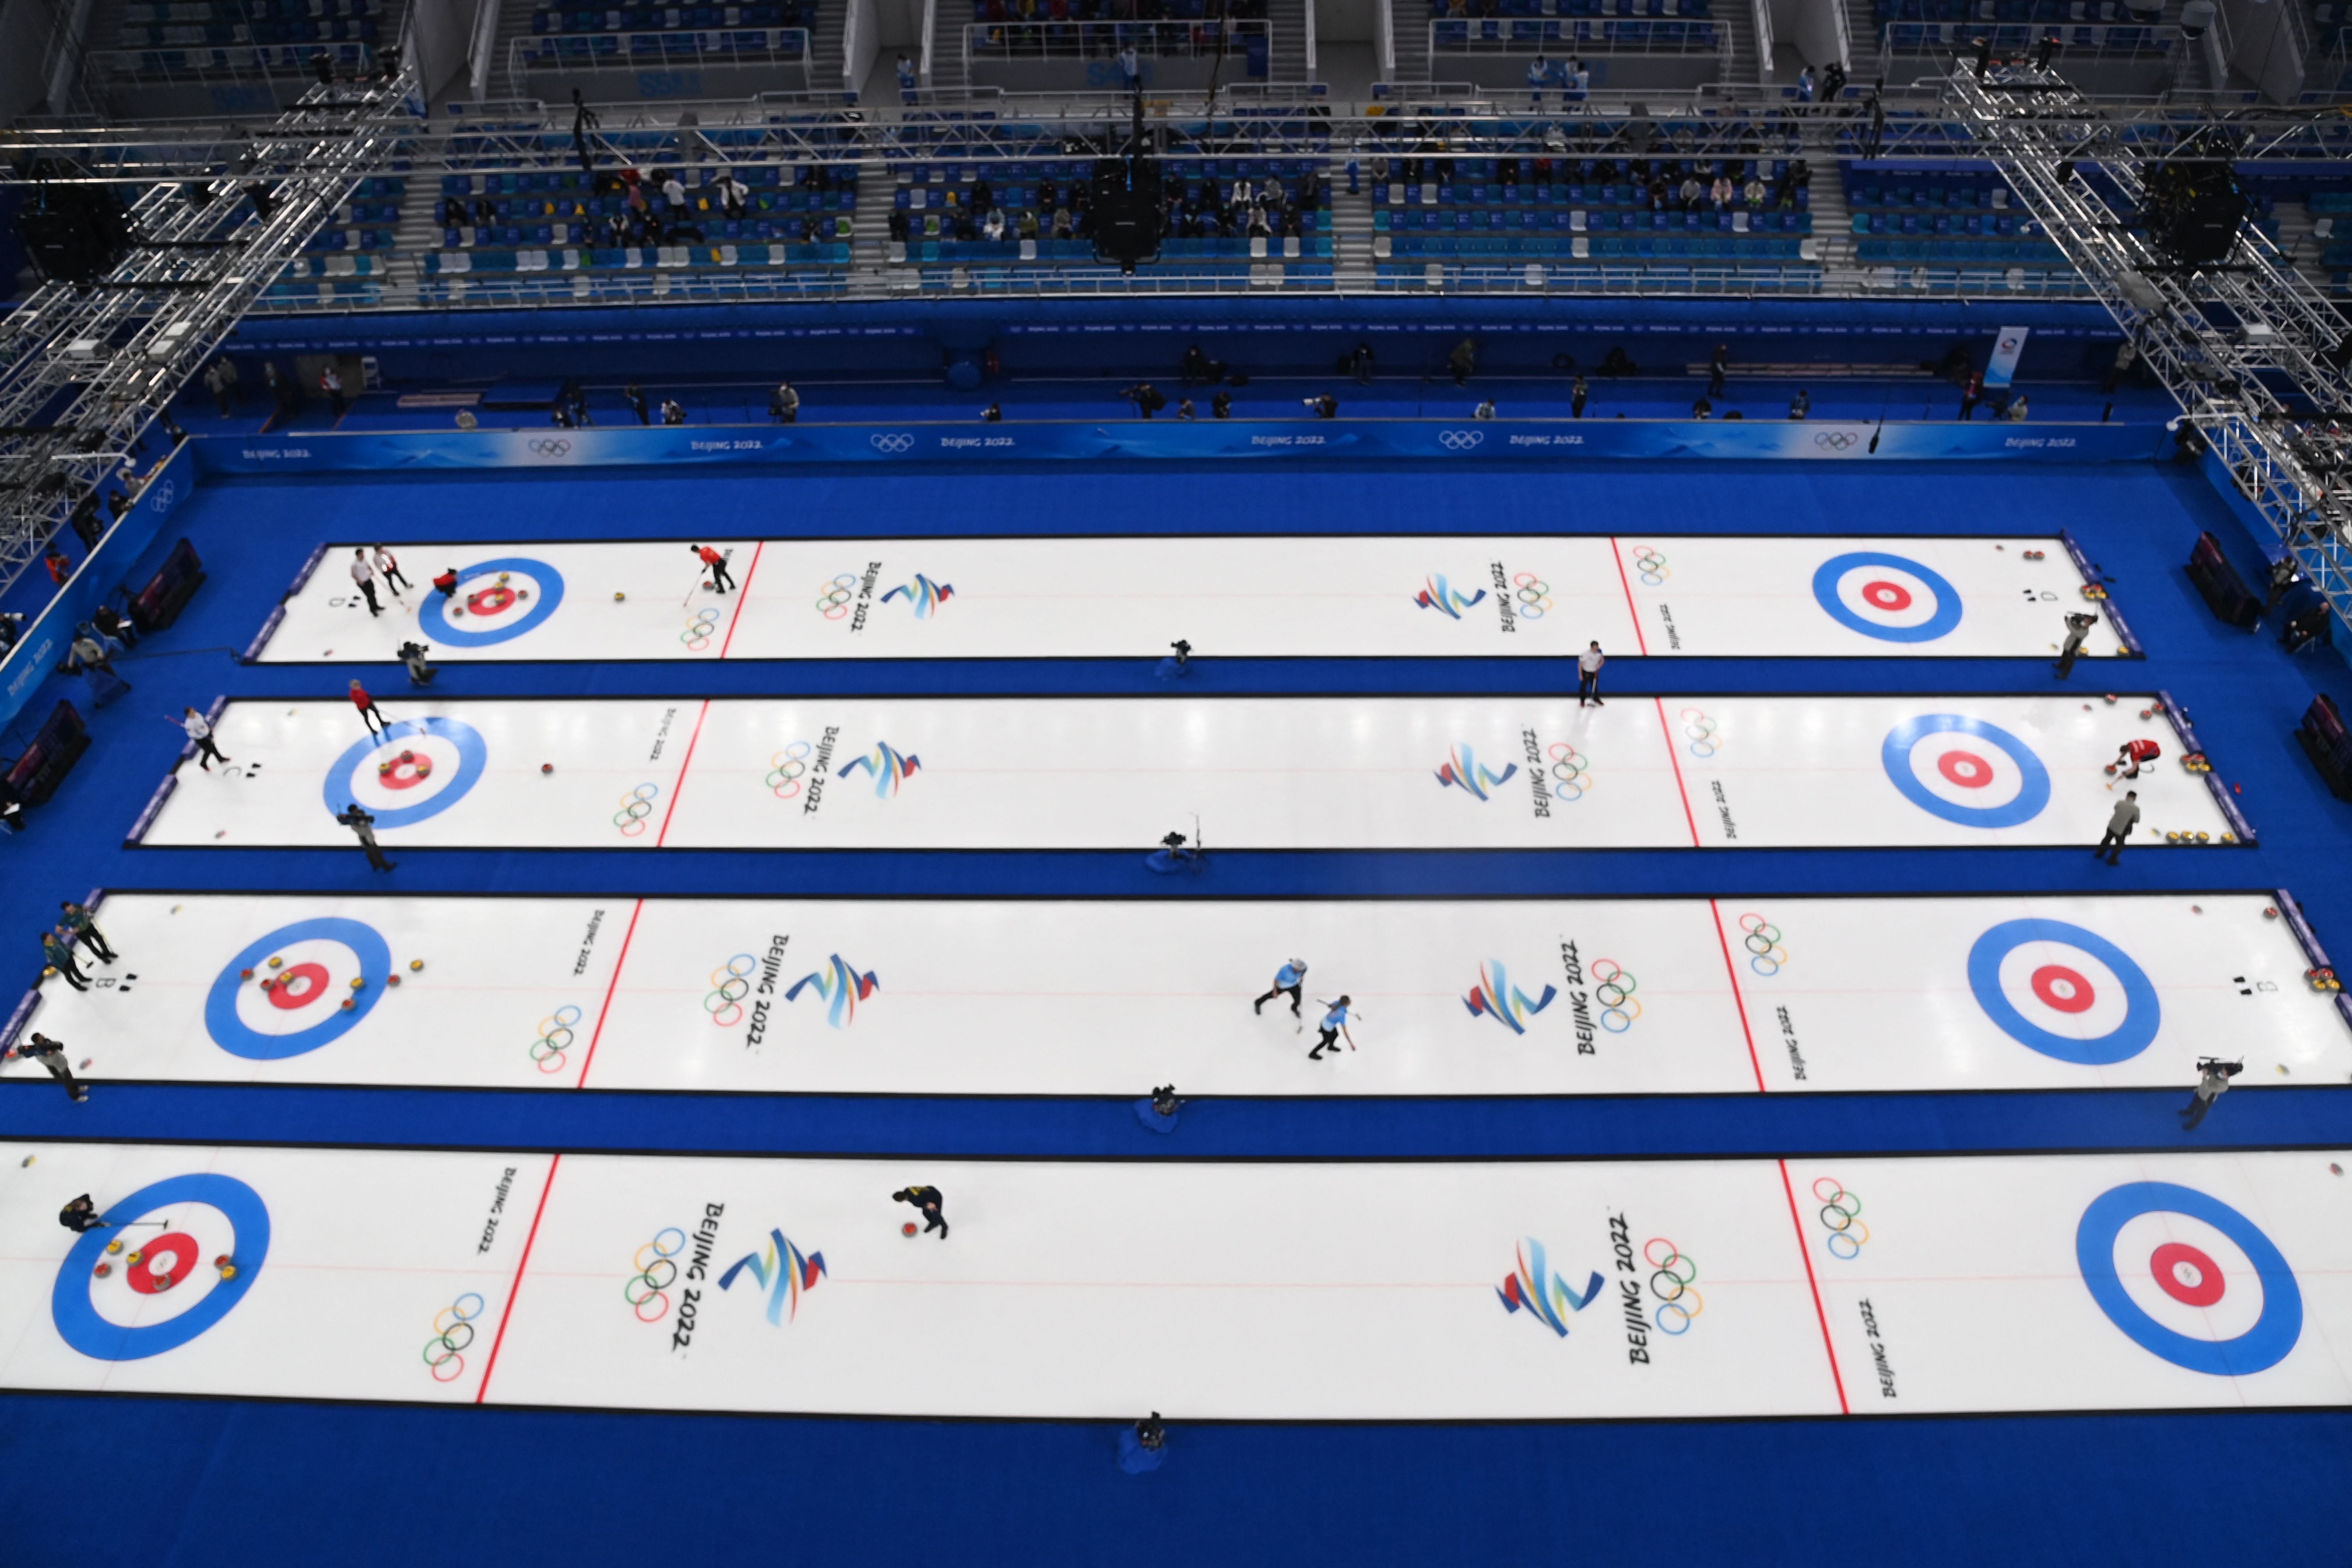 Curling at the 2022 Winter Olympics is being held at the National Aquatics Centre